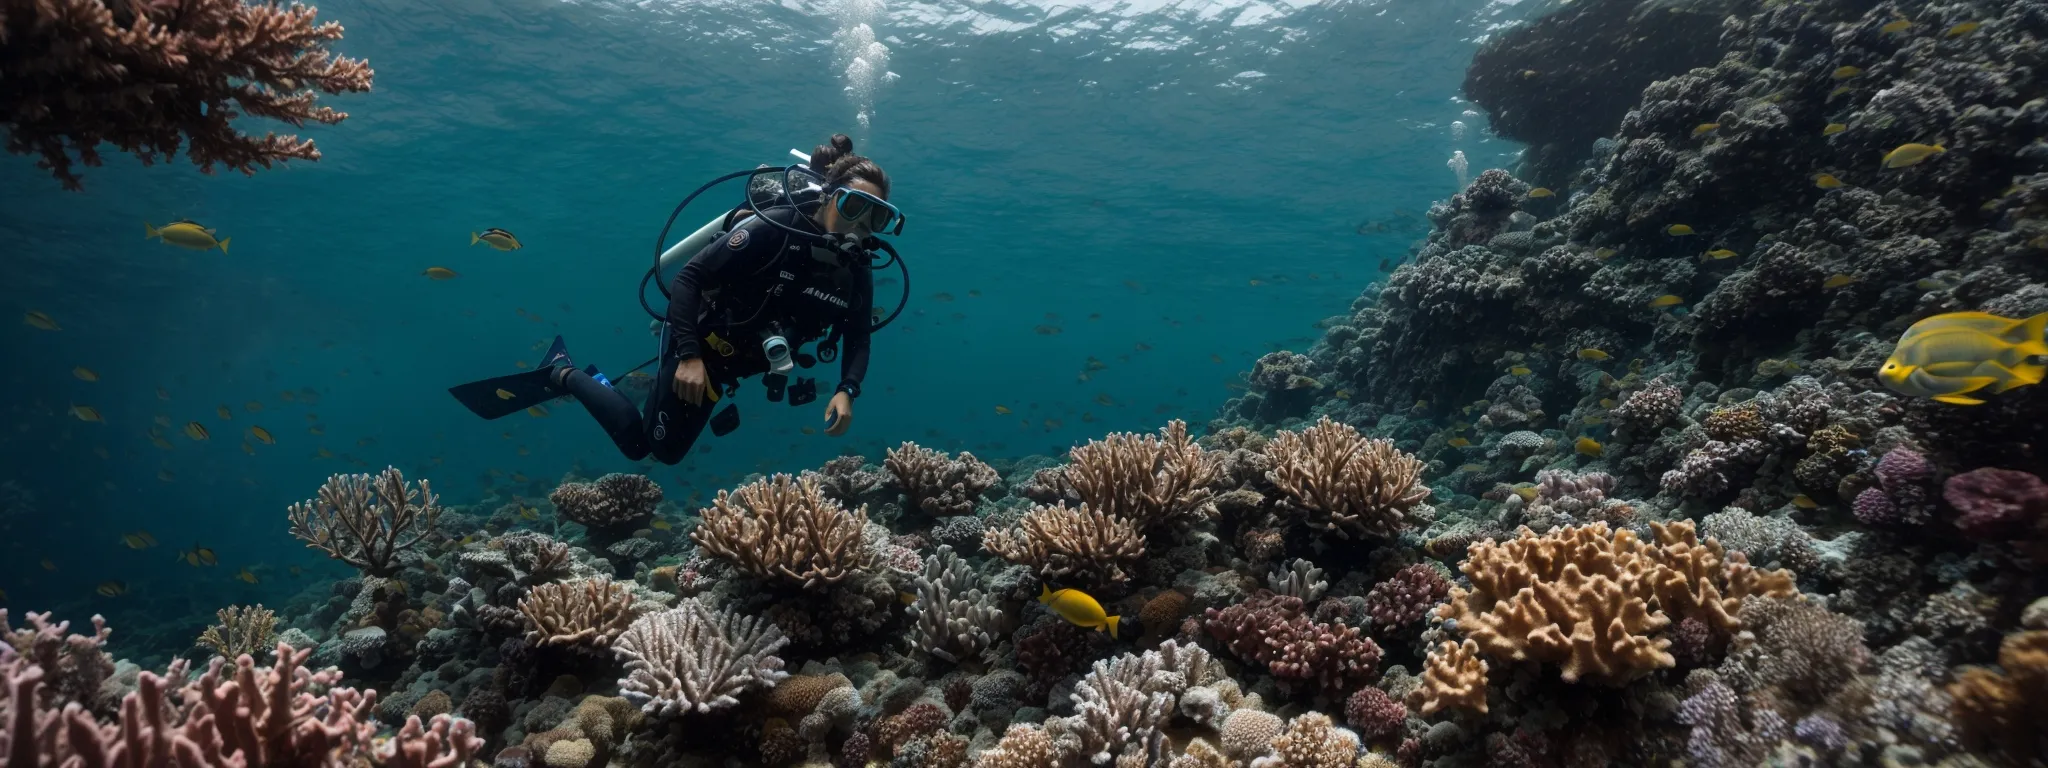 a diver explores a vibrant coral reef teeming with marine life, symbolizing the detailed search for valuable long-tail keywords.